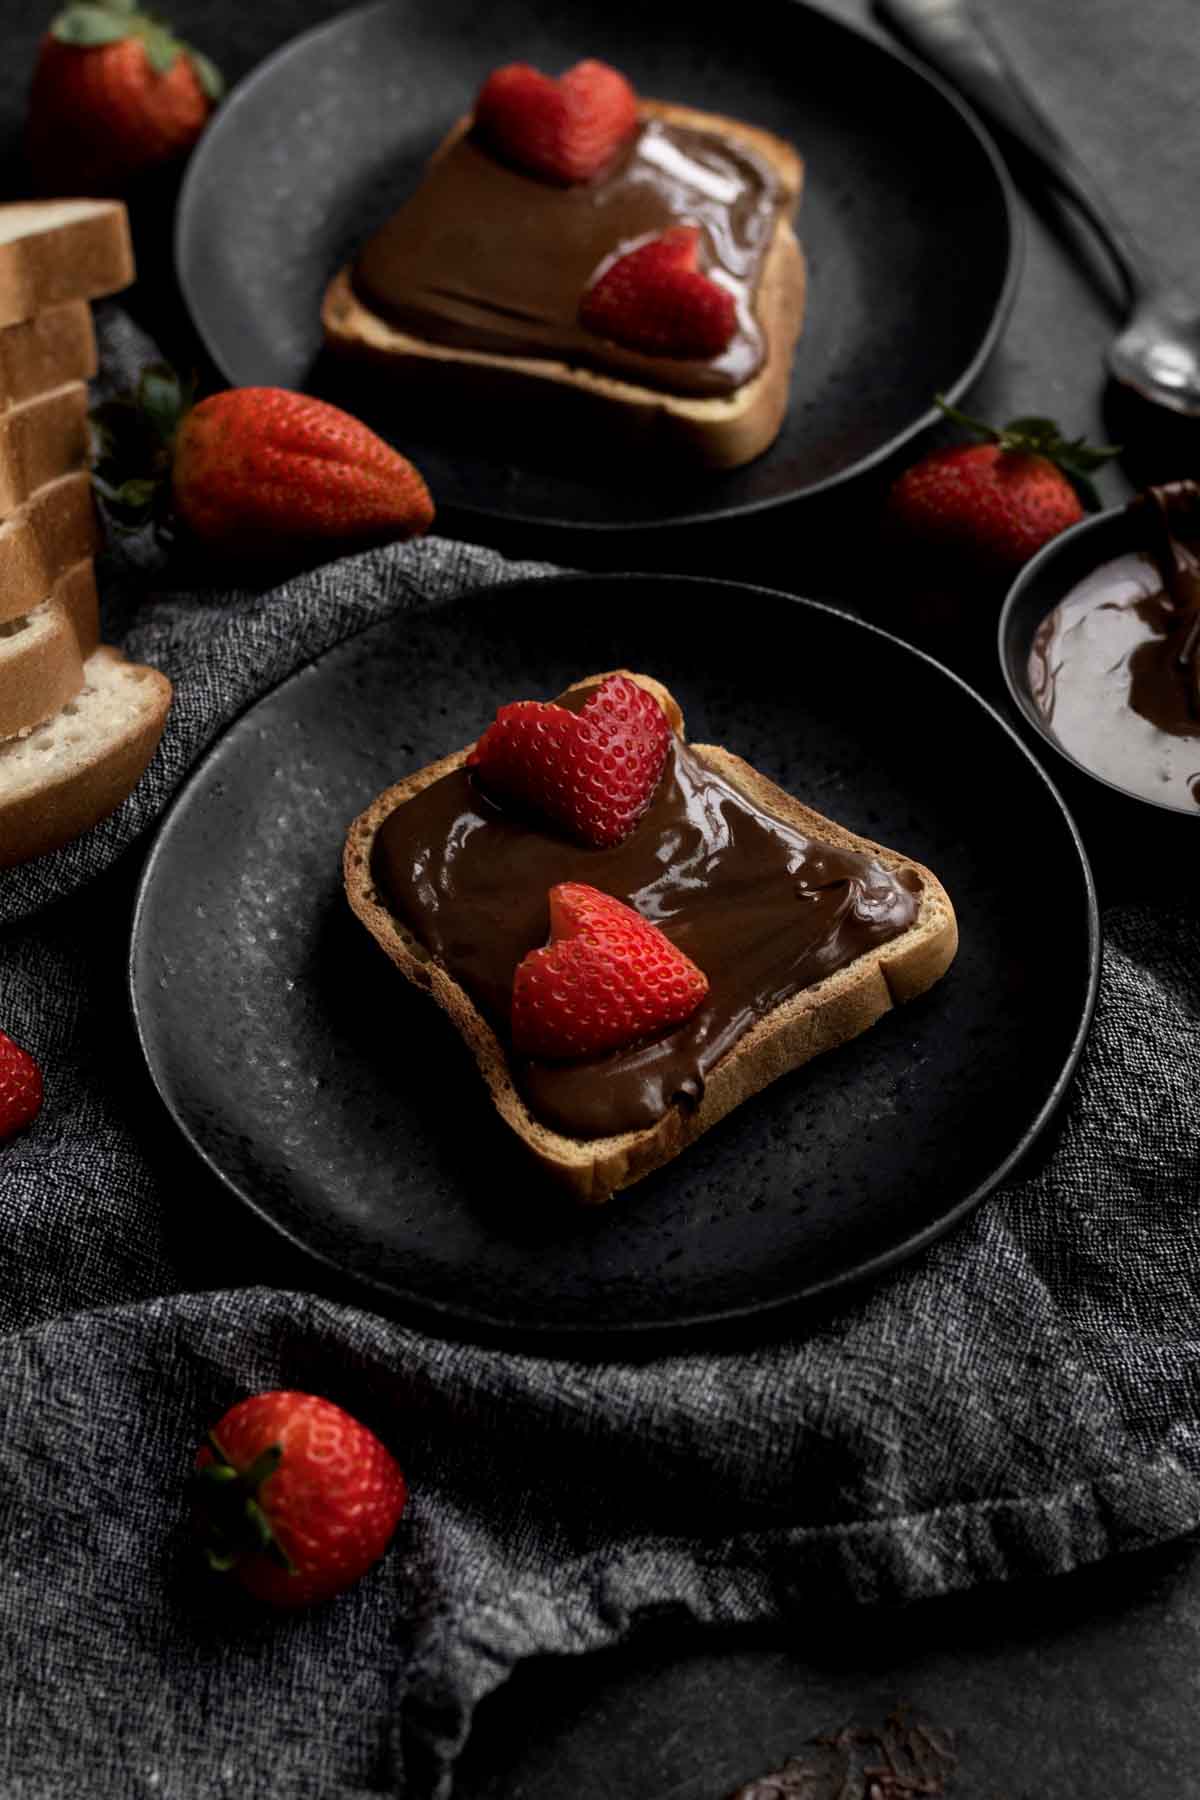 Nut Free Chocolate Spread on toast with strawberries cut like hearts.